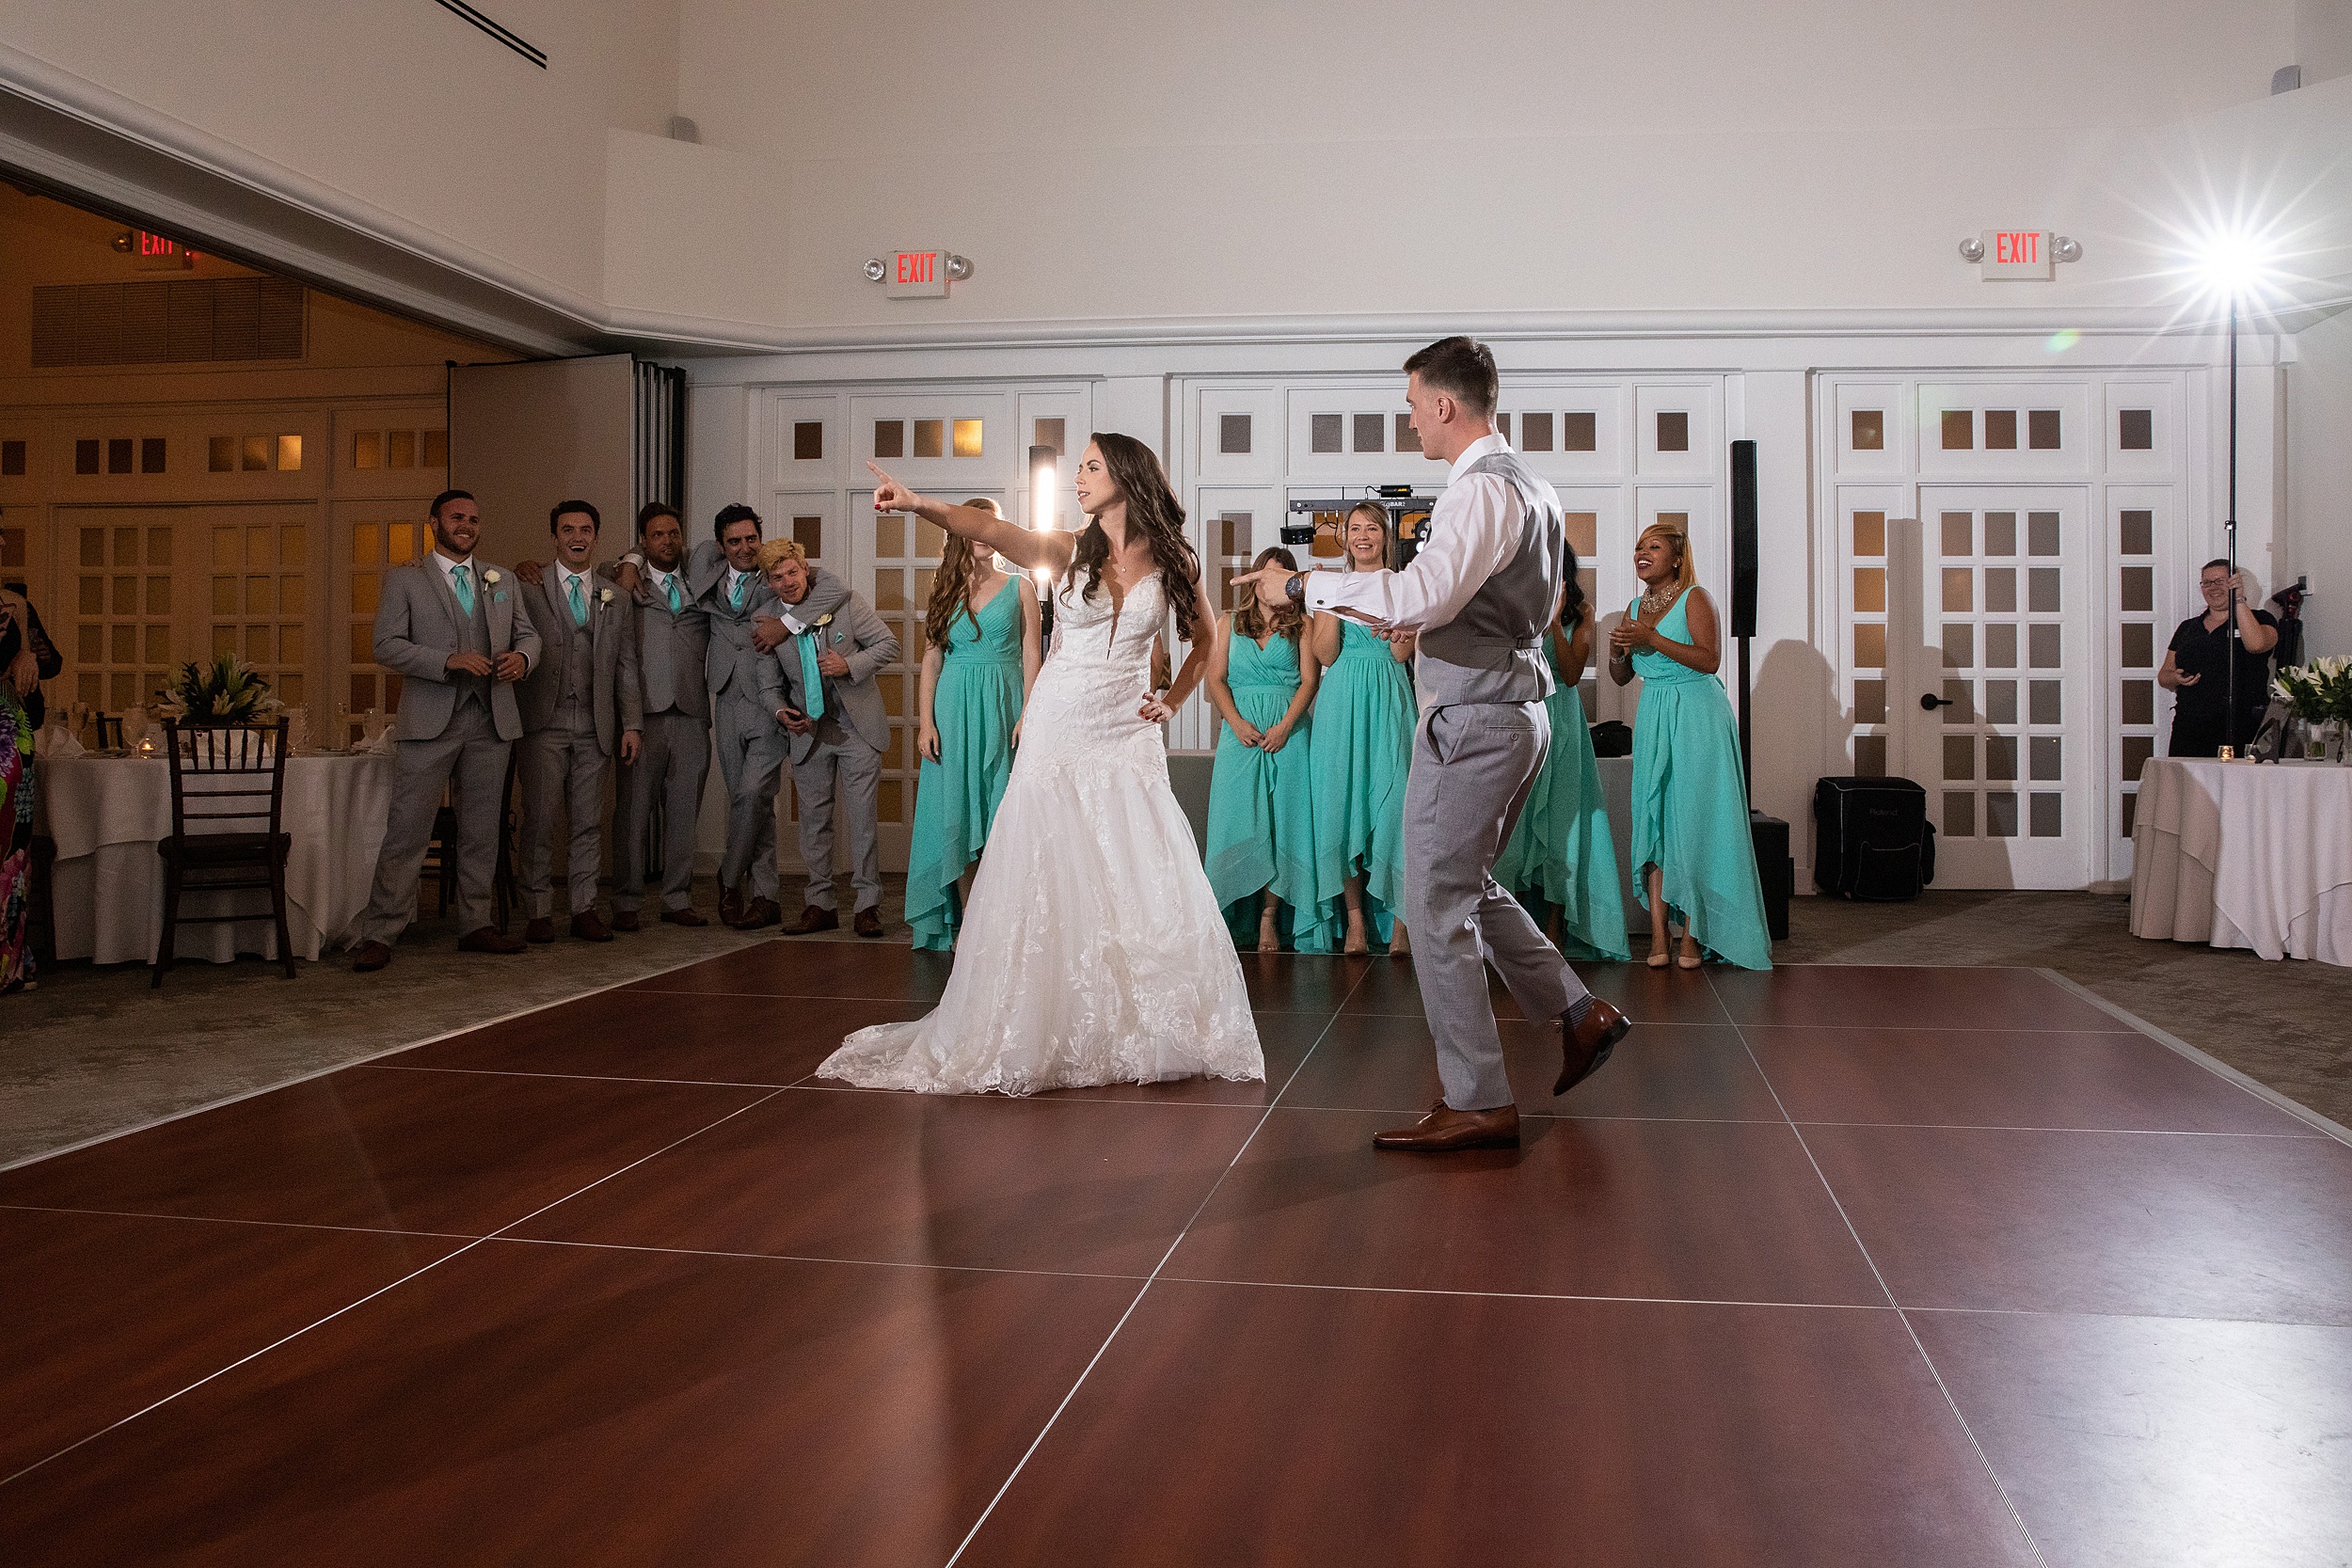 Newlyweds dance and celebrate on the dance floor with their wedding party cheering them on